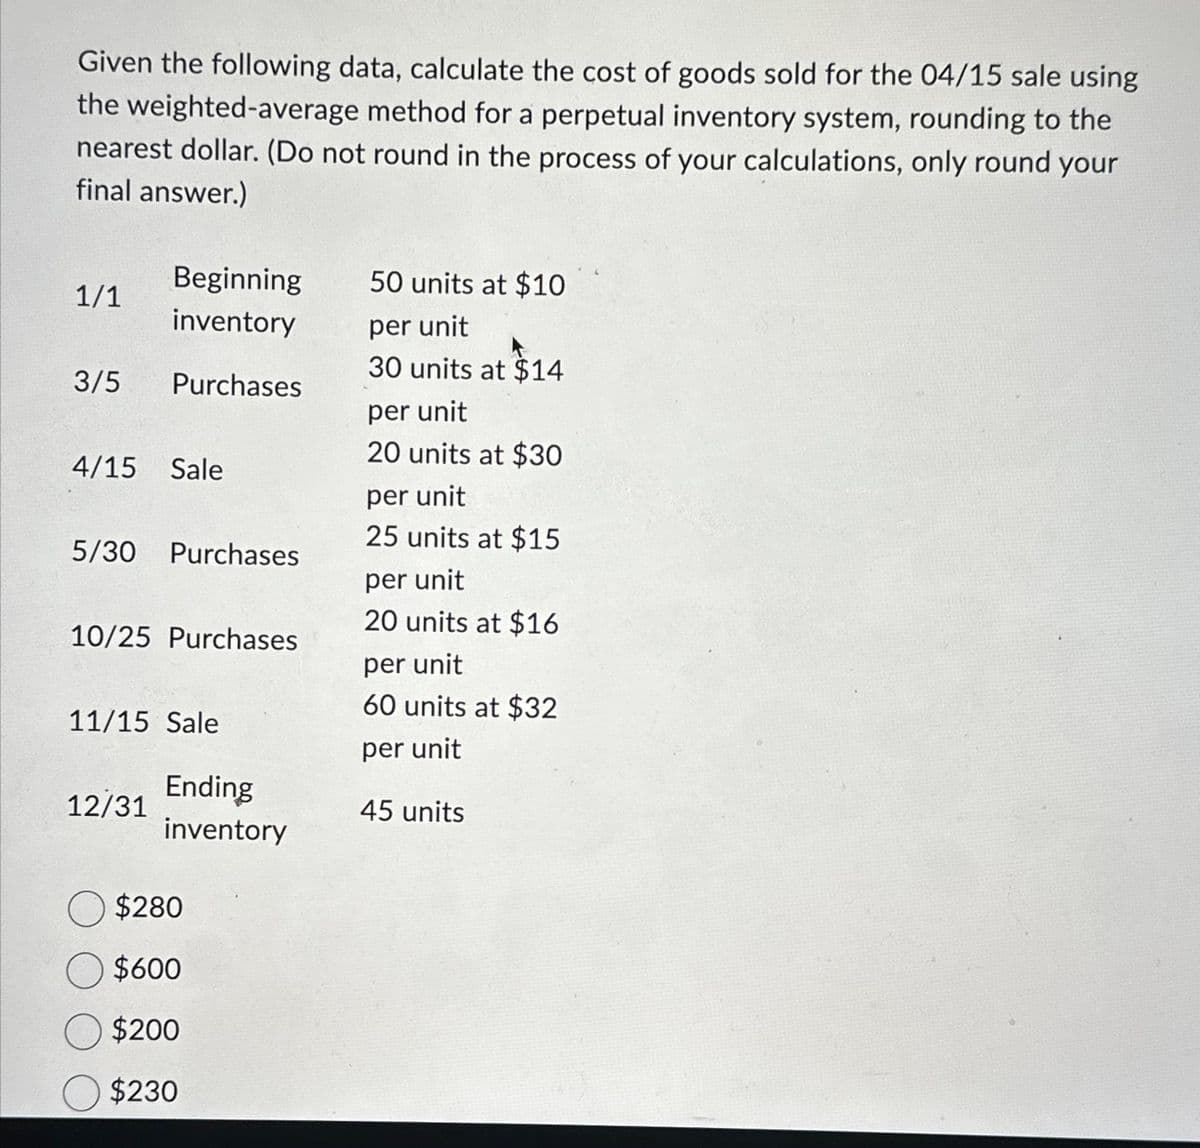 Given the following data, calculate the cost of goods sold for the 04/15 sale using
the weighted-average method for a perpetual inventory system, rounding to the
nearest dollar. (Do not round in the process of your calculations, only round your
final answer.)
1/1
3/5
Beginning
inventory
Purchases
4/15 Sale
5/30 Purchases
10/25 Purchases
11/15 Sale
12/31
Ending
inventory
O $280
O $600
$200
$230
50 units at $10
per unit
30 units at $14
per unit
20 units at $30
per unit
25 units at $15
per unit
20 units at $16
per unit
60 units at $32
per unit
45 units